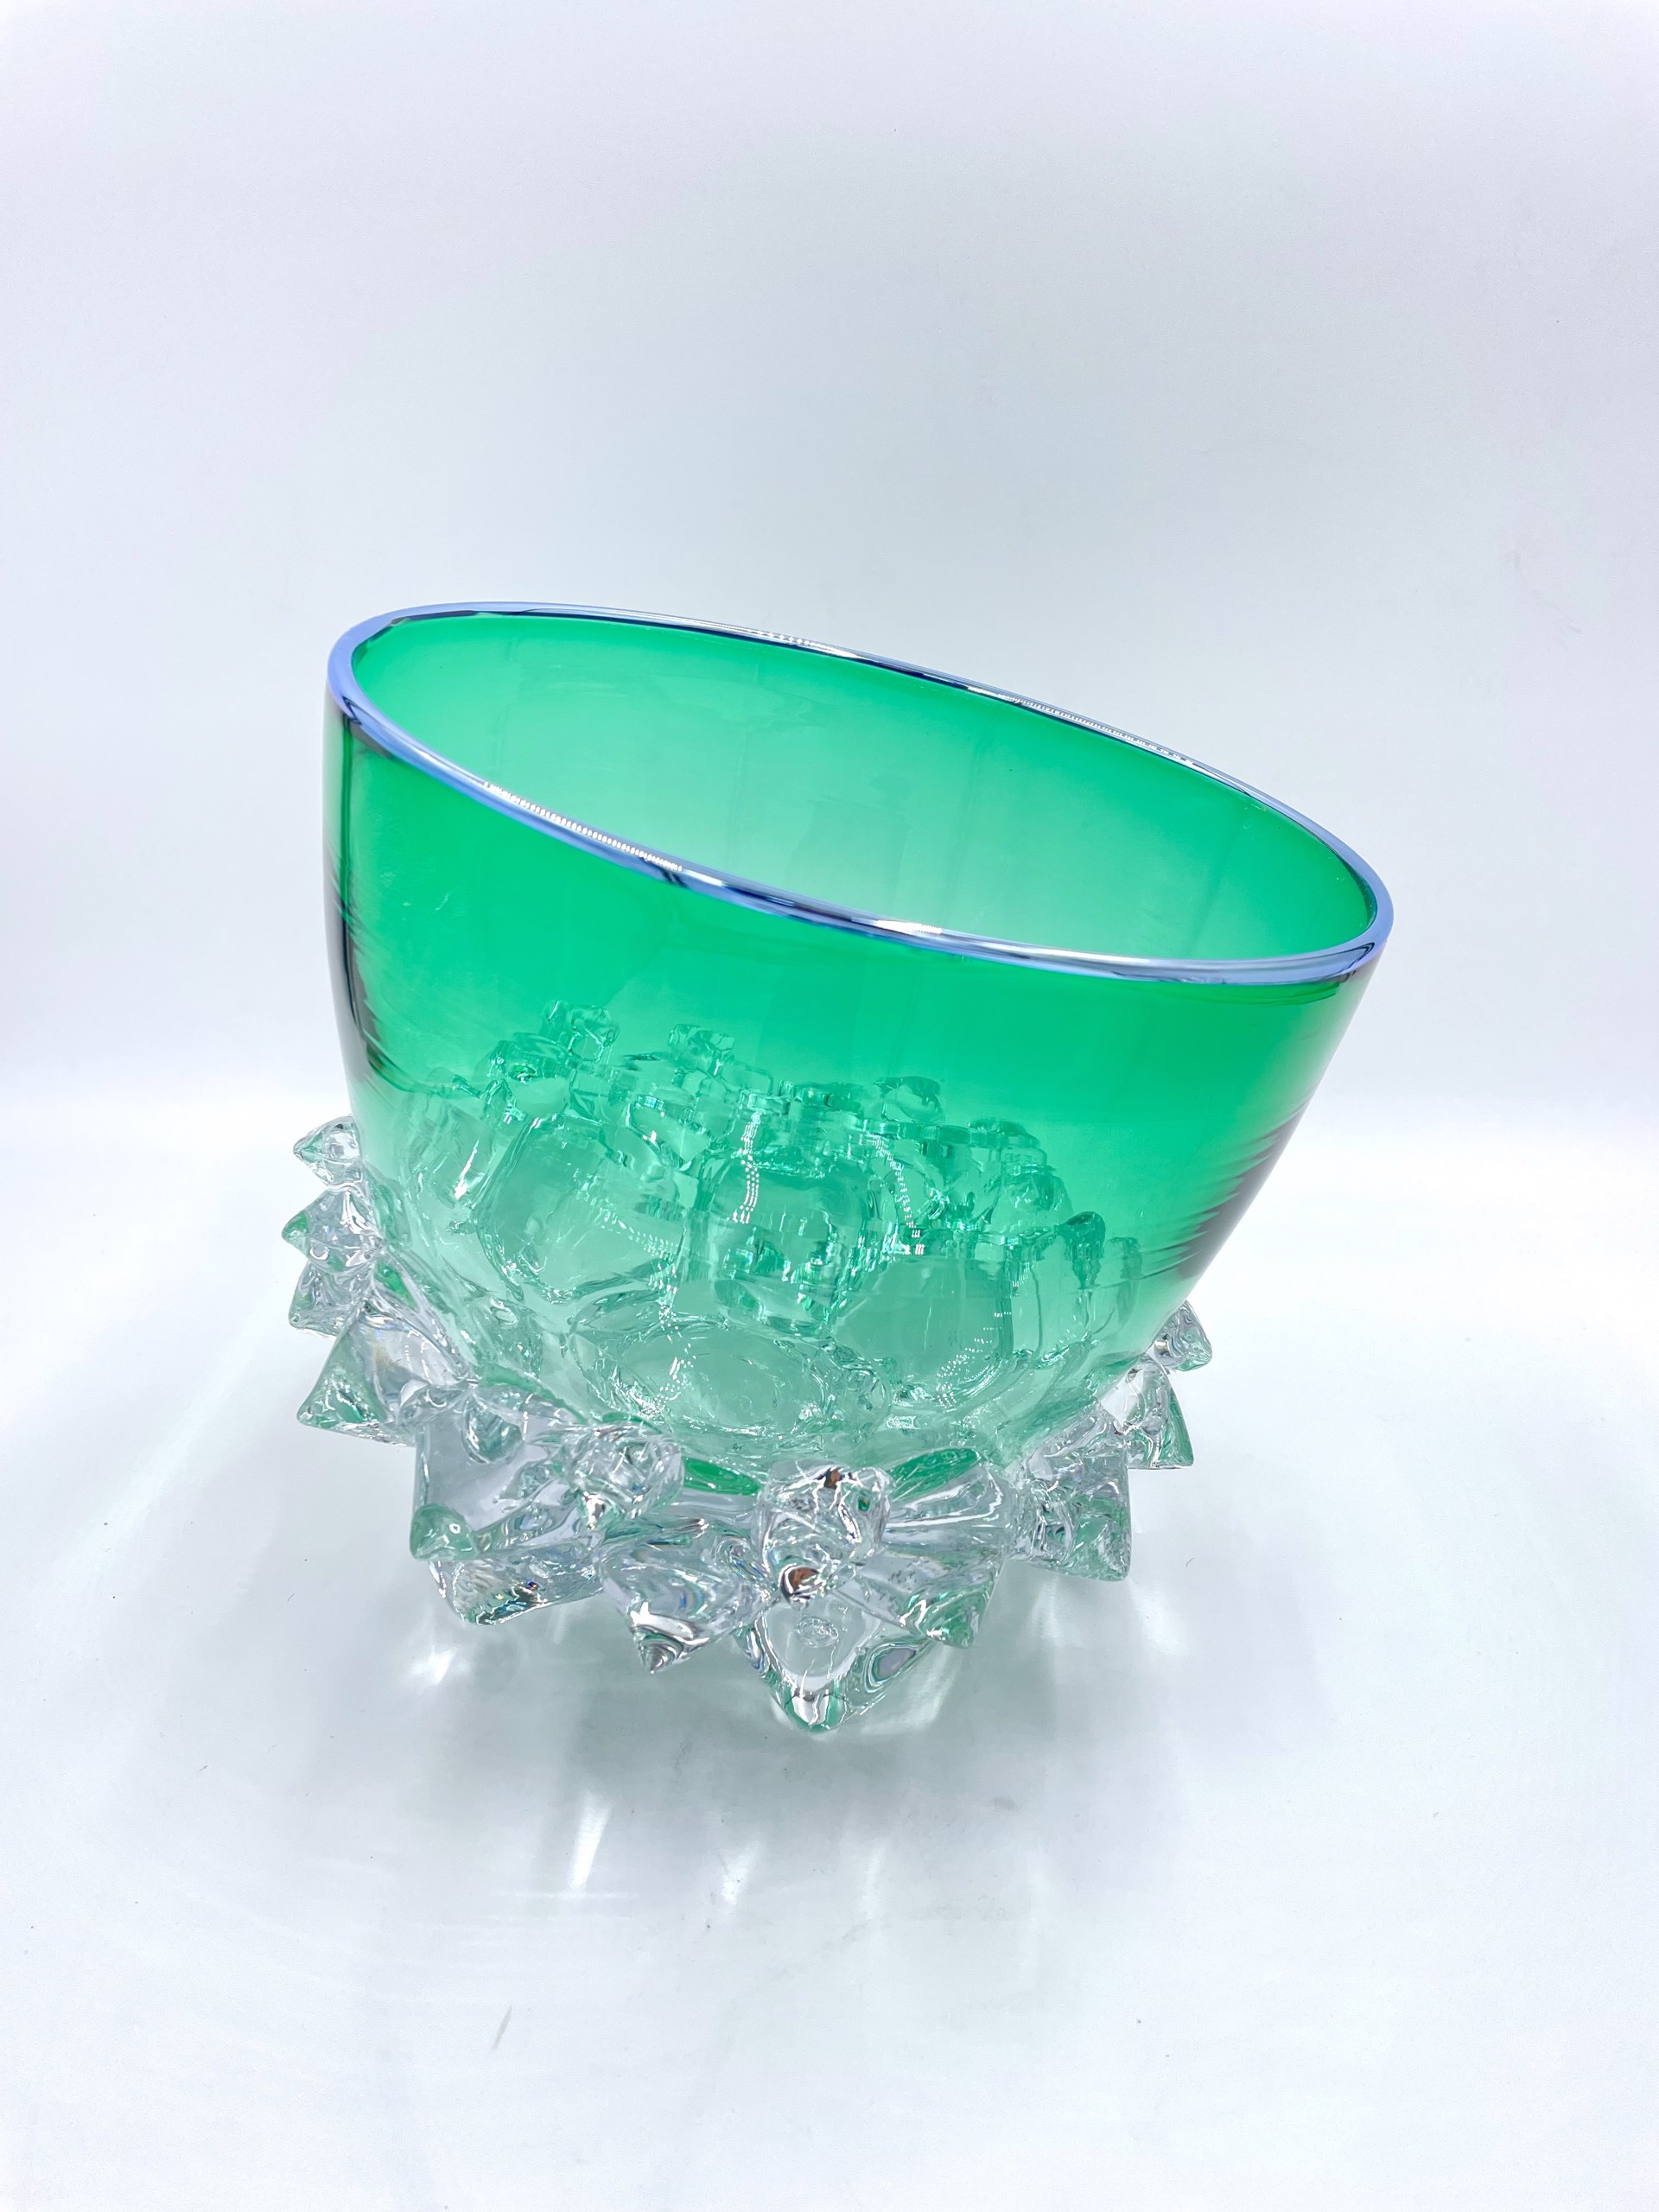 Thorn Vessel Emerald Green 9" by Andrew Madvin